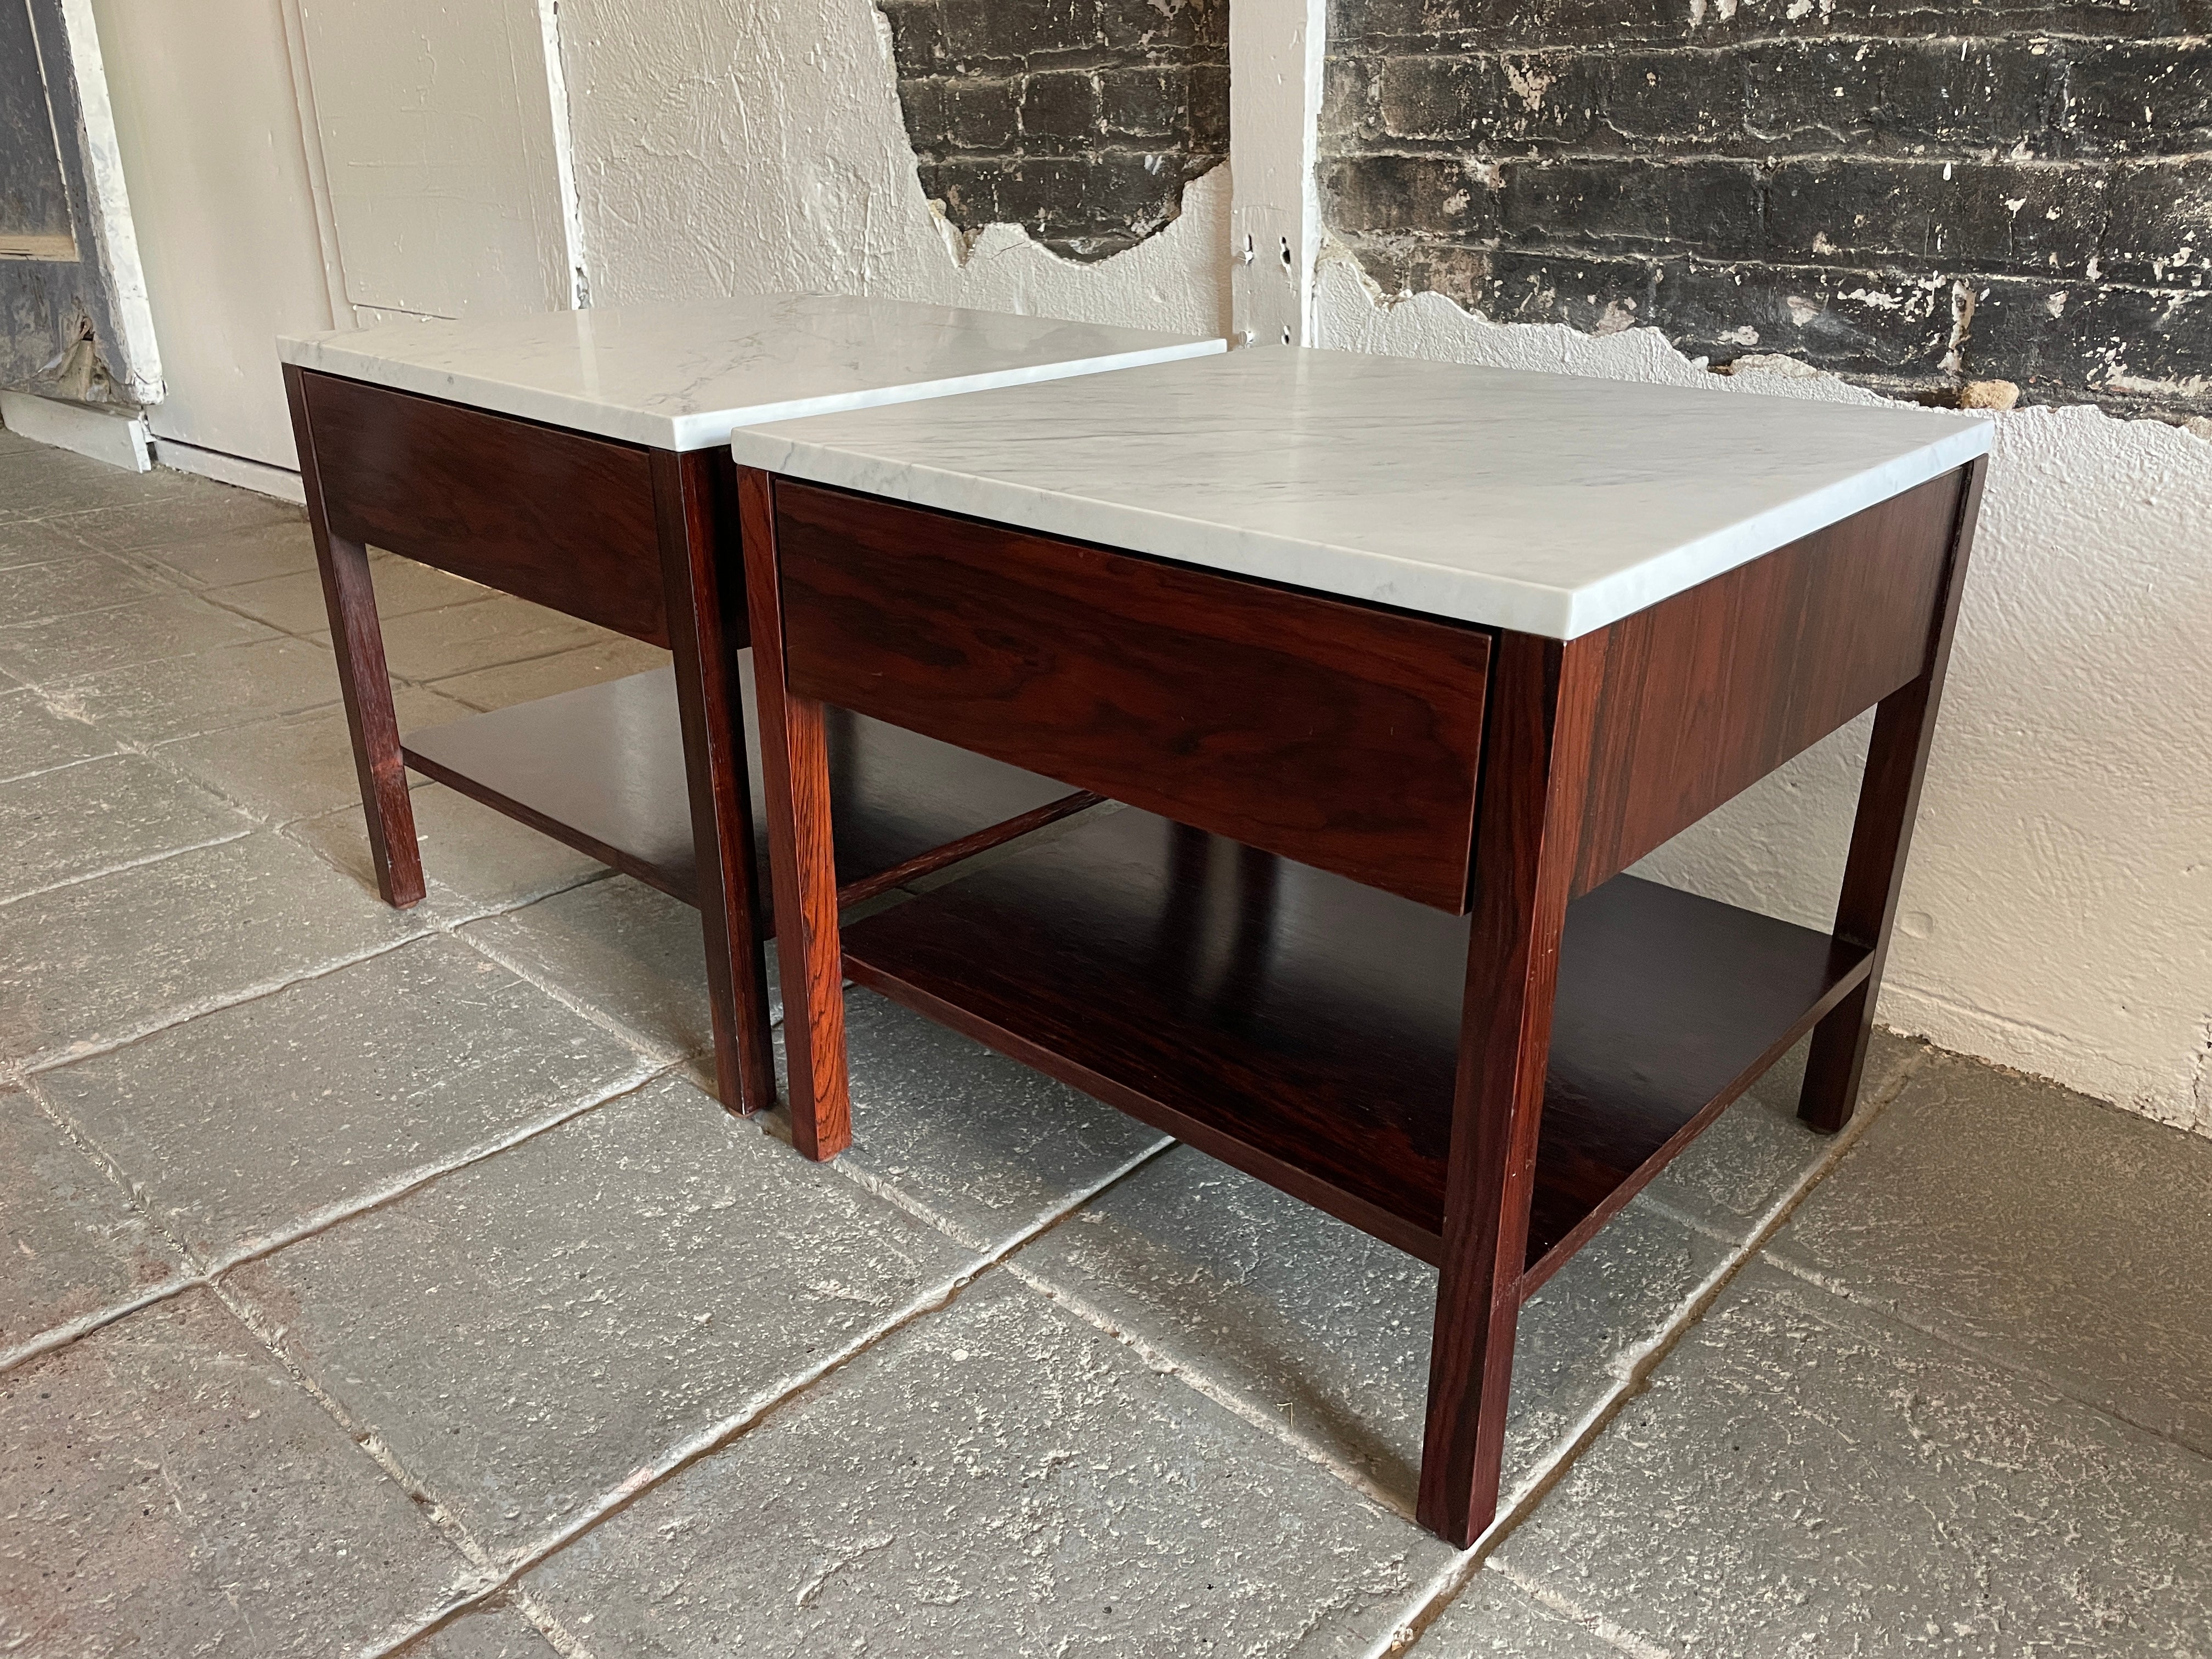 Pair of beautiful Florence knoll single drawer nightstands or side tables. Rosewood single drawer nightstands with clean Carrara marble tops. Oak drawers with single white divider. Has metal drawer slides. Both are labeled knoll. Located in Brooklyn